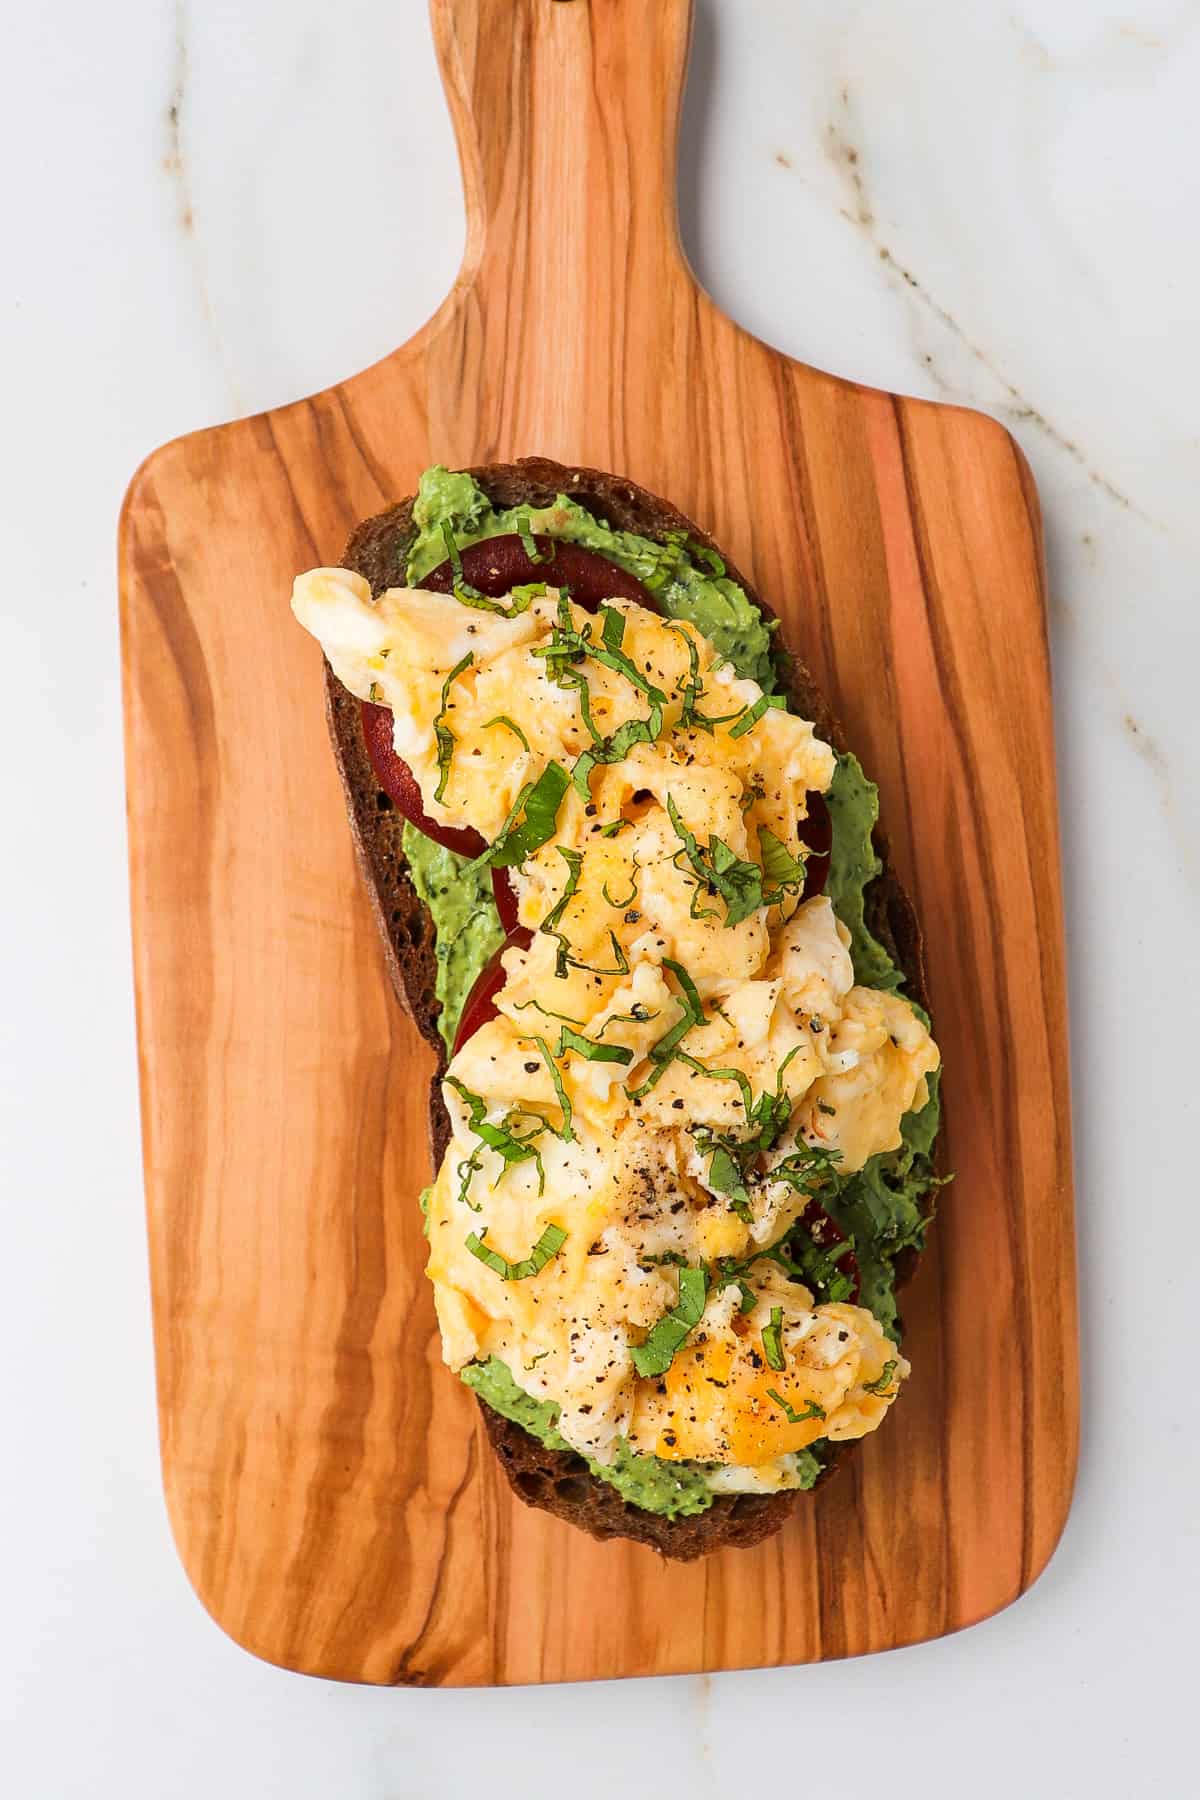 Slice of sourdough on a wooden board with pesto, scrambled eggs and chopped basil.